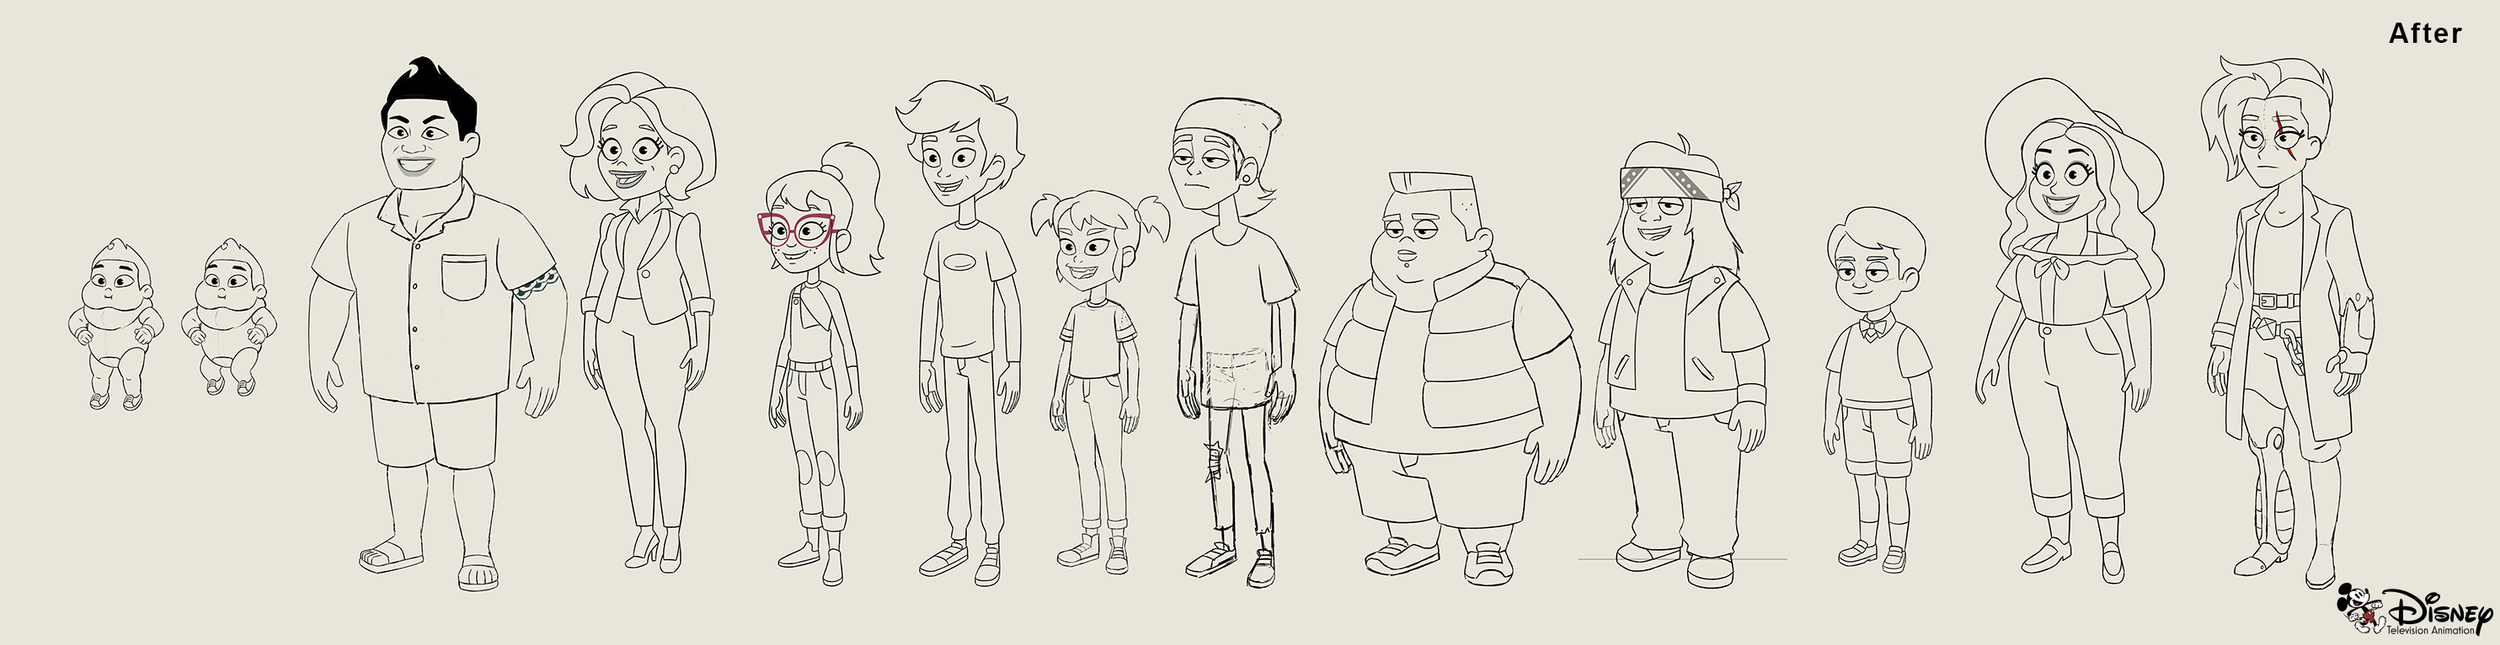 Lineup AFTER small.png